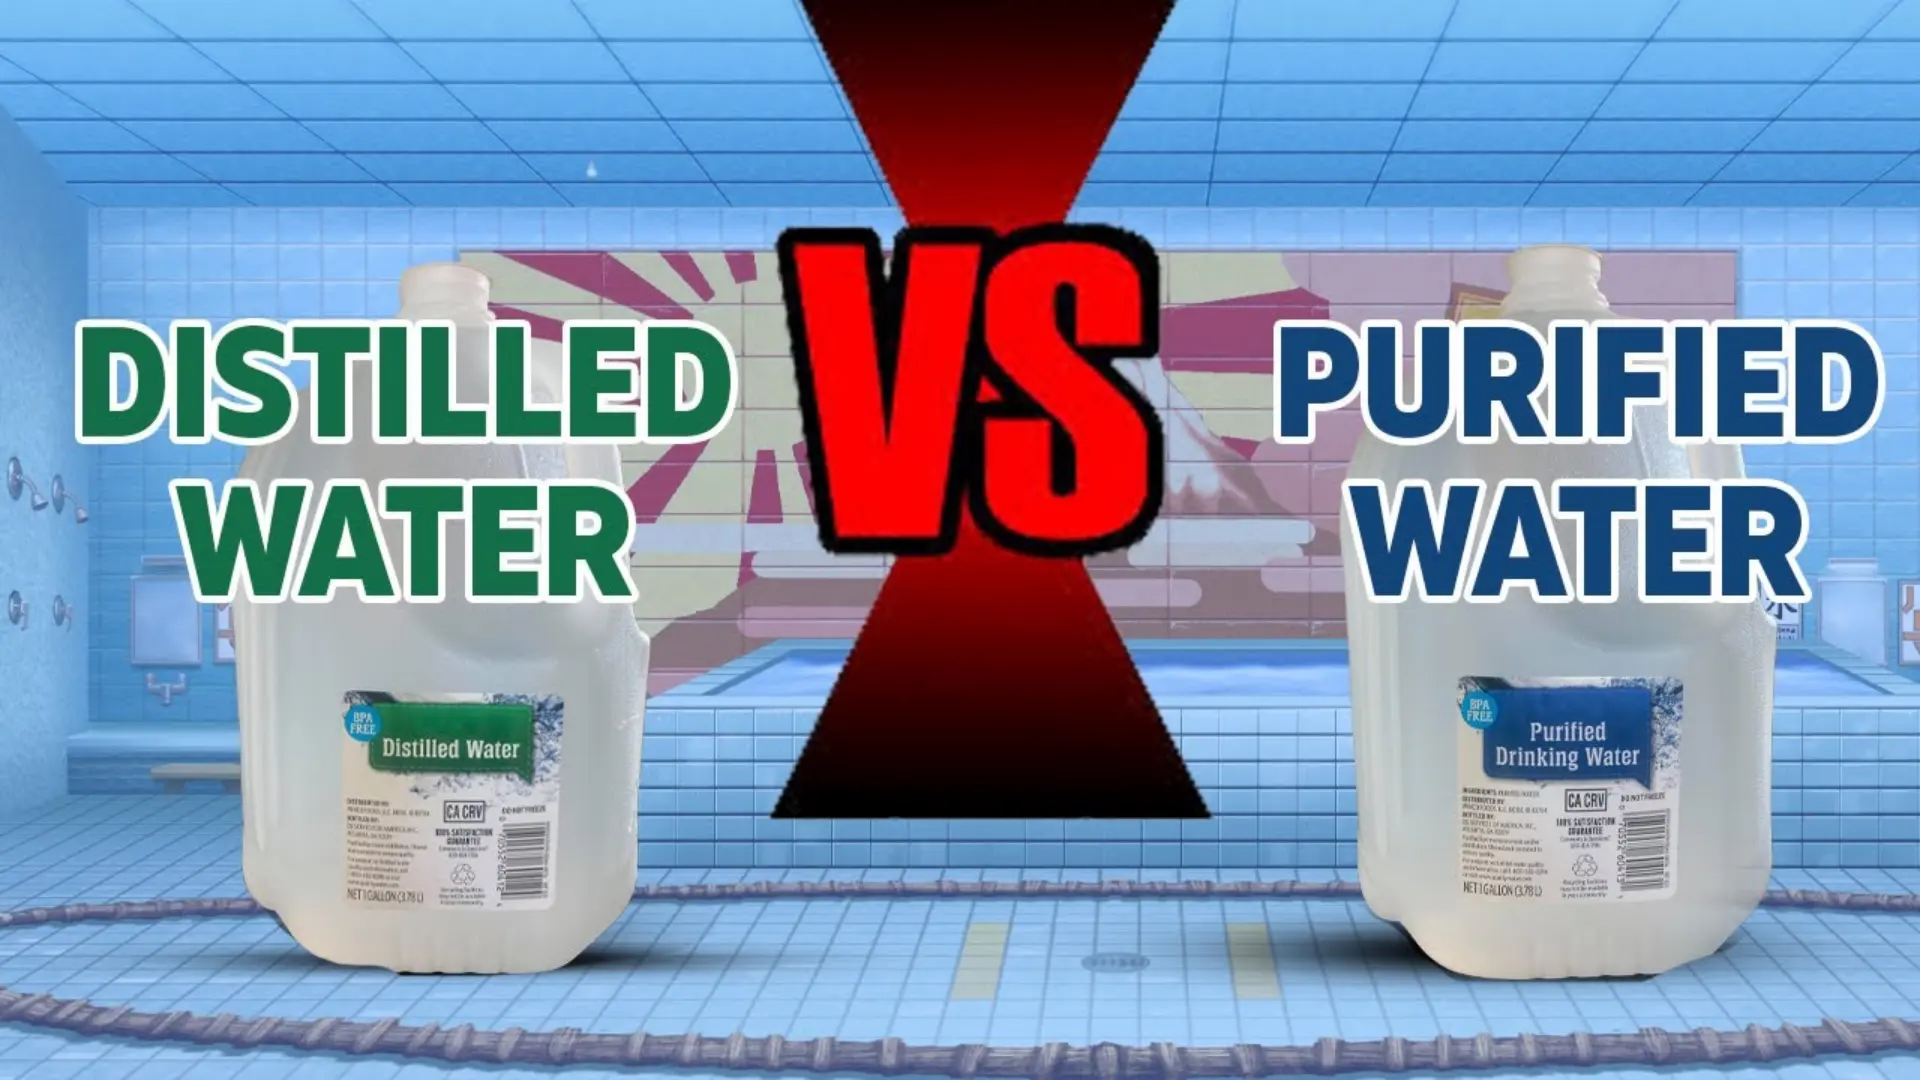 Which One Is Better? Purified Water or Distilled